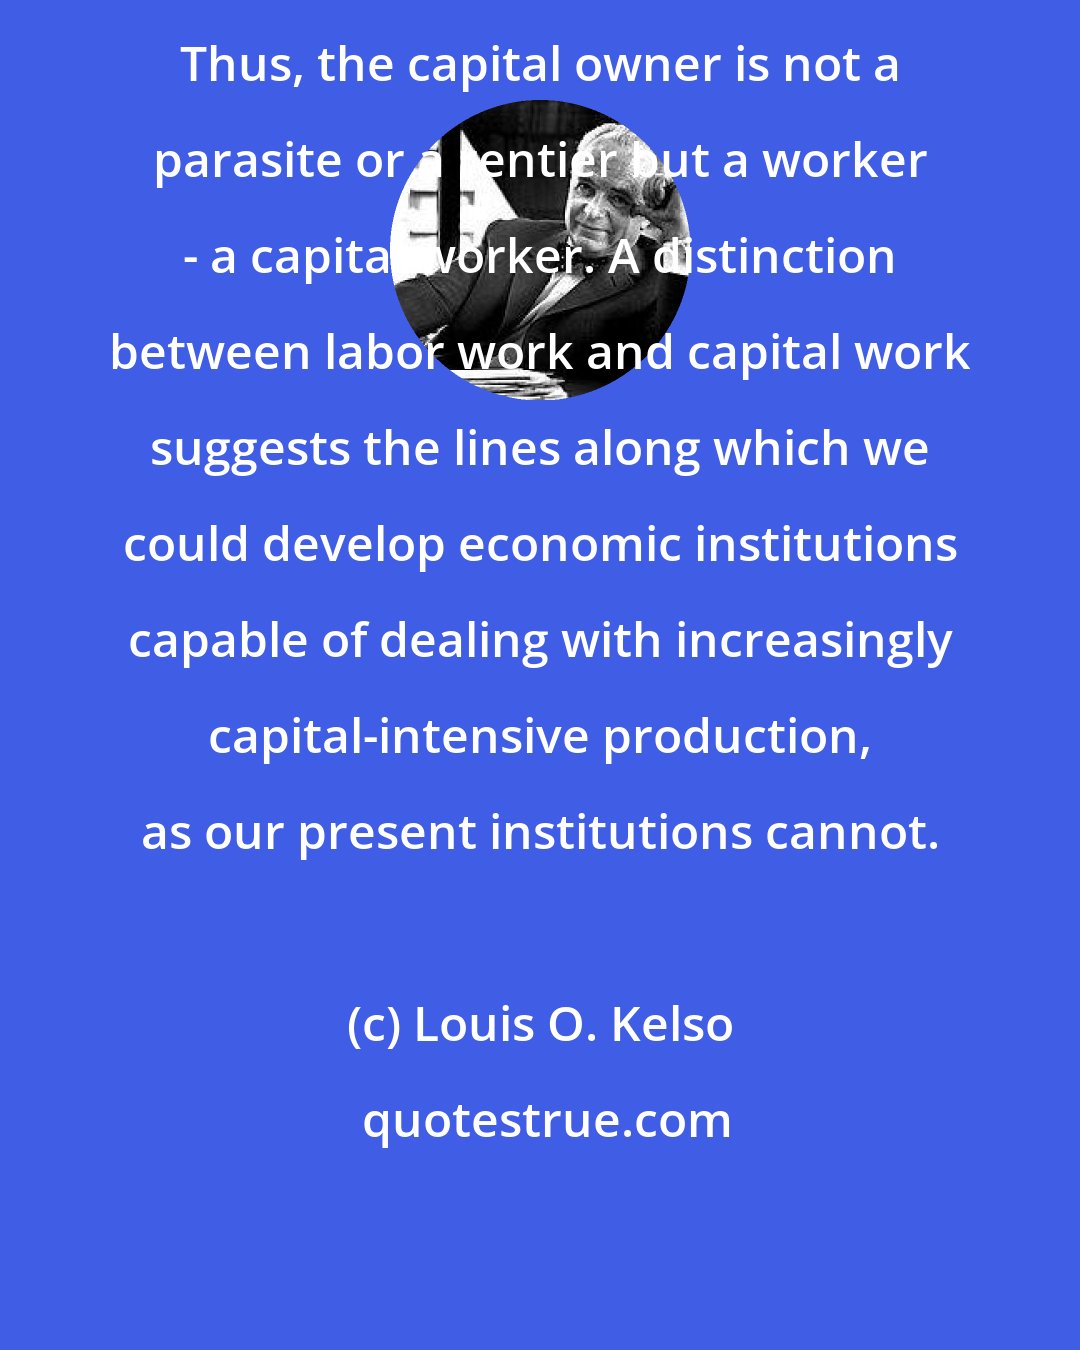 Louis O. Kelso: Thus, the capital owner is not a parasite or a rentier but a worker - a capital worker. A distinction between labor work and capital work suggests the lines along which we could develop economic institutions capable of dealing with increasingly capital-intensive production, as our present institutions cannot.